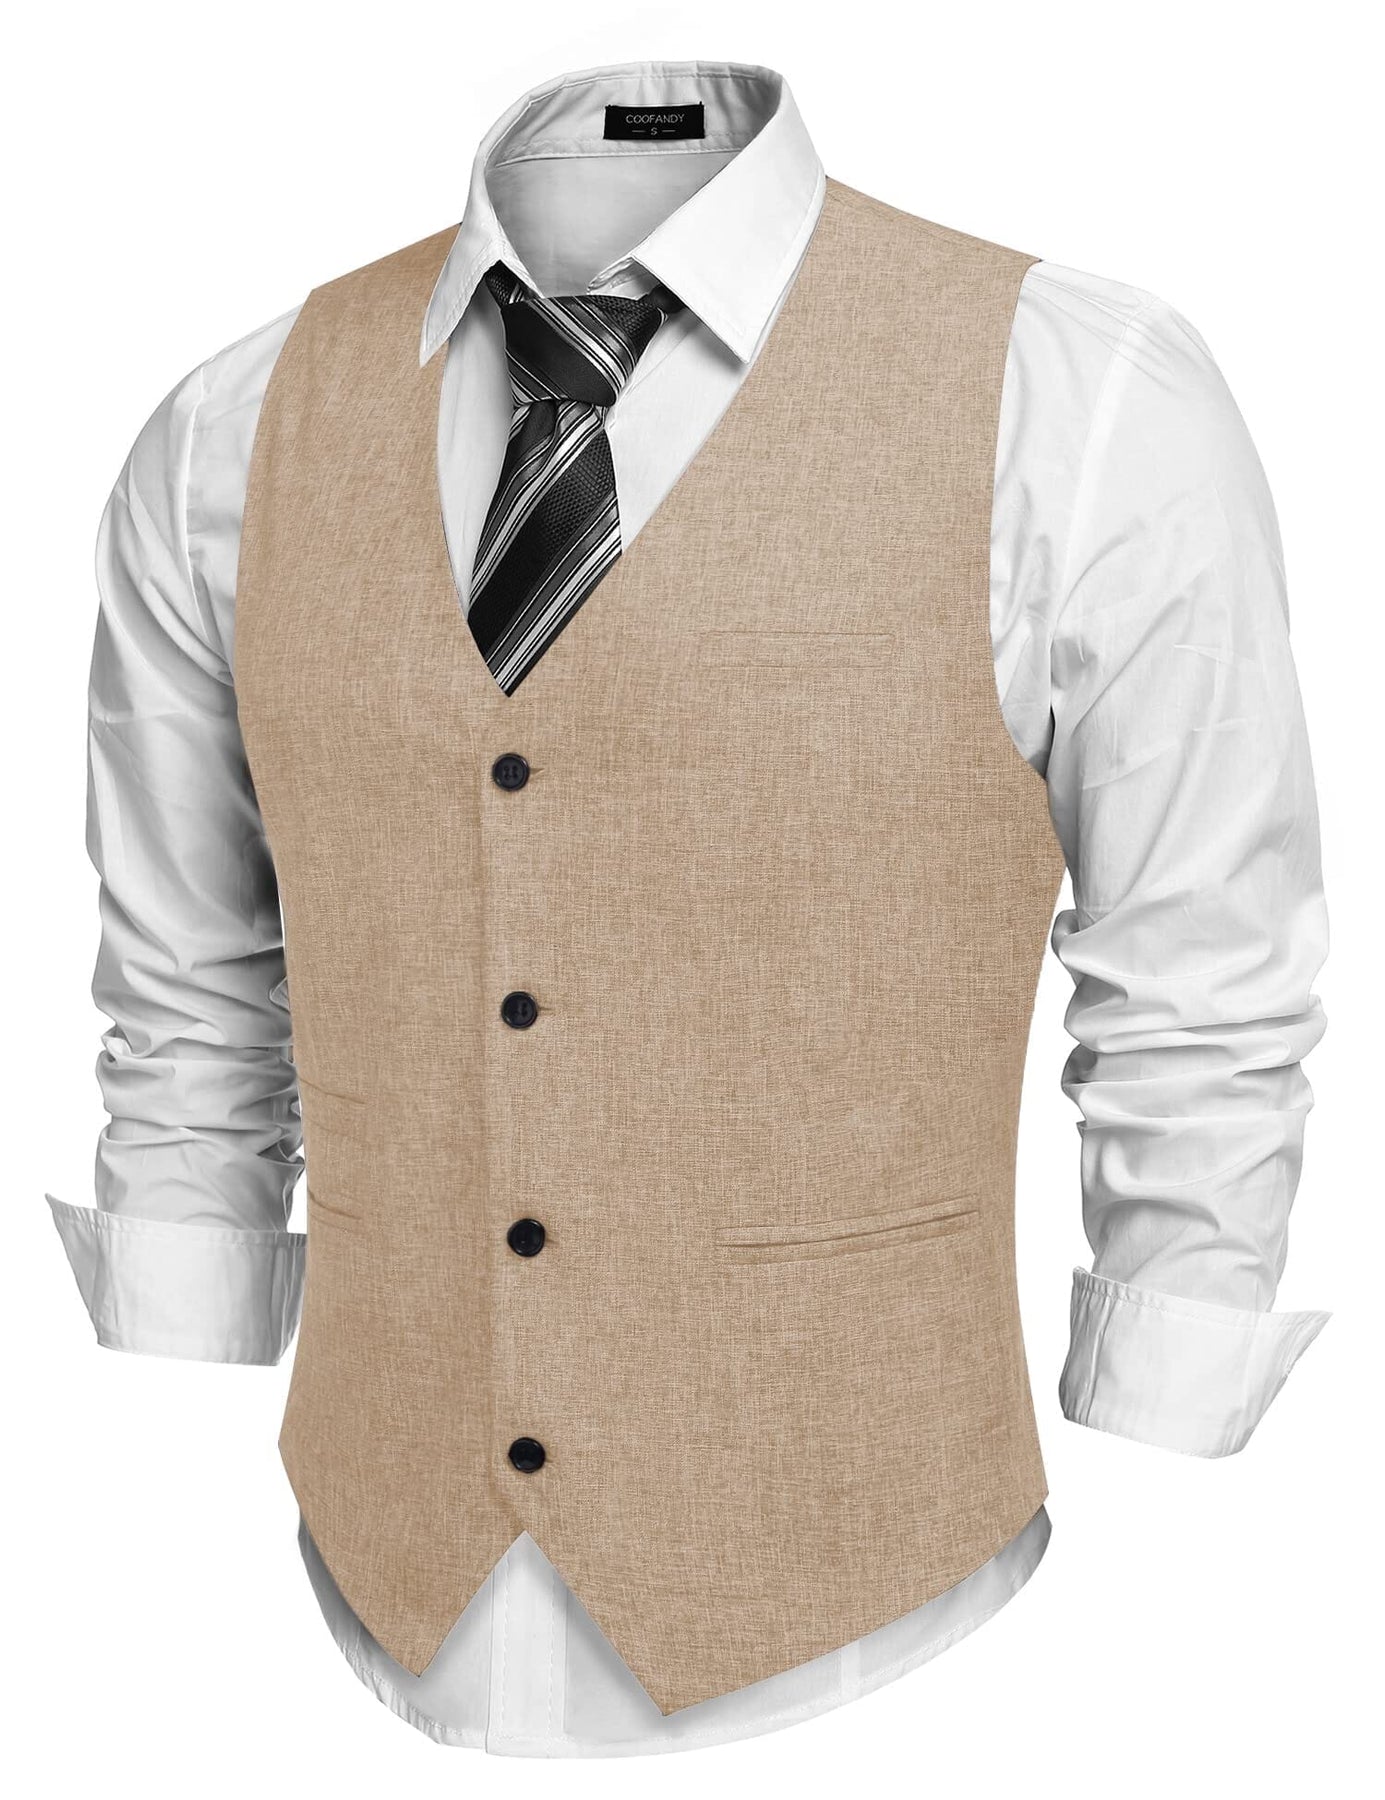 Waistcoat Business Vests (US Only) – coofandy